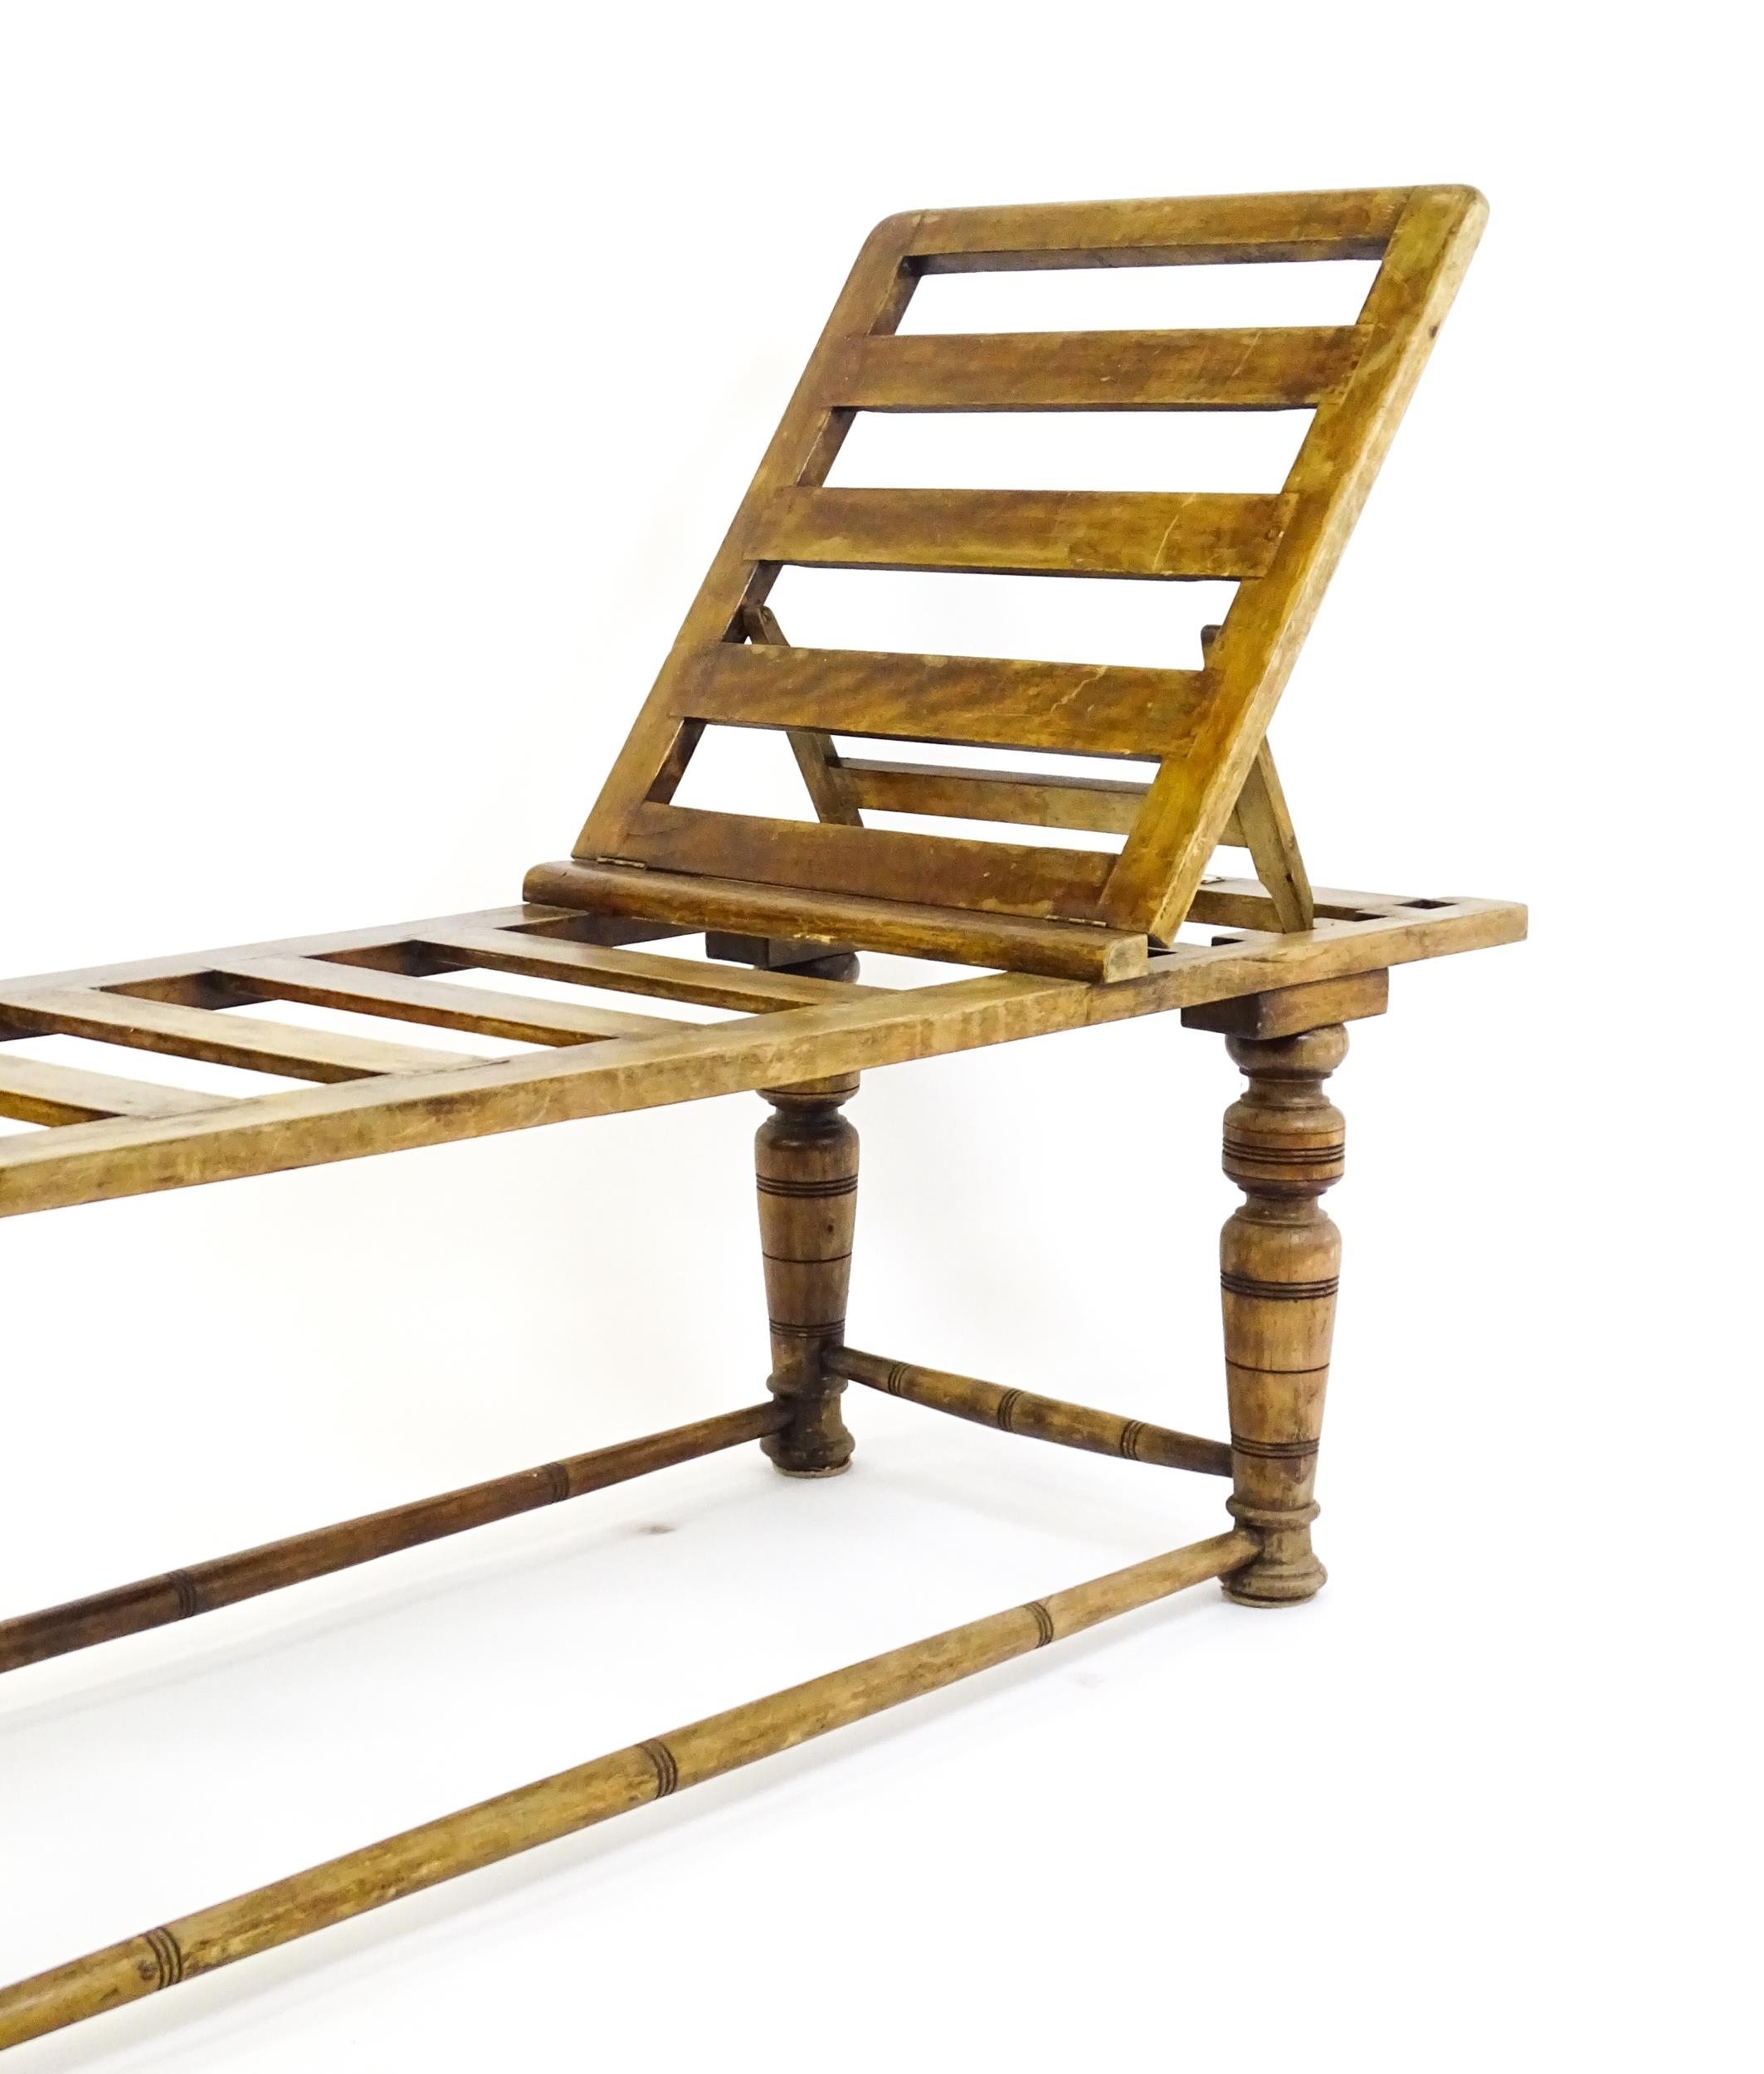 A late 19thC 'Leveson & Sons' campaign bed /day bed with a slatted bed and adjustable headrest above - Image 4 of 9